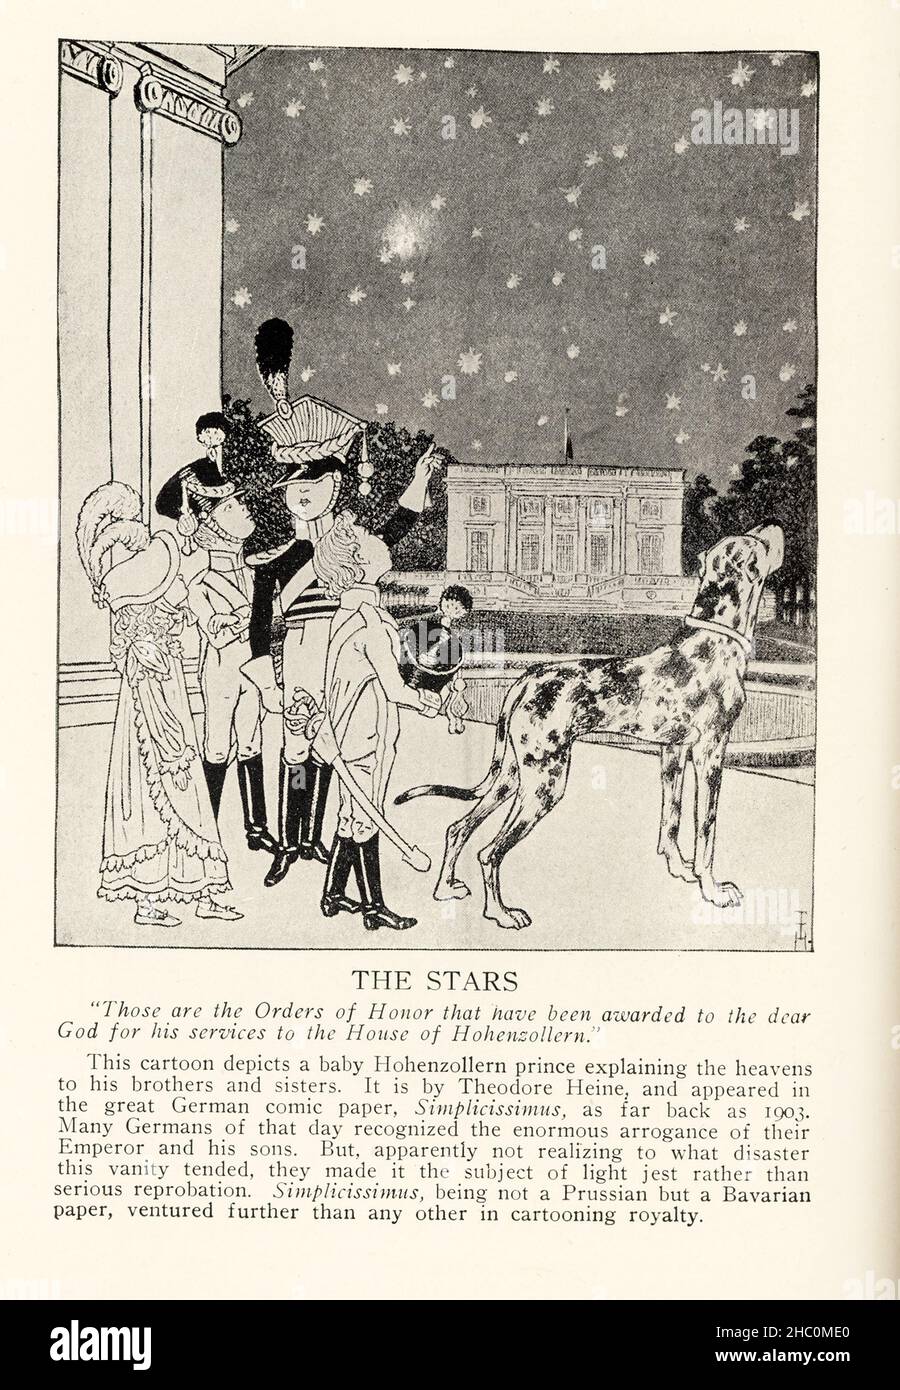 The Stars – “Those are the Orders of Honor that have been awarded to the dear God for his services to the house of Hohenzollern.” This cartoon depicts a baby Hollenzollern prince explaining the heavens to his brothers and sisters. It is by Theodore Heine, and appeared in the great German comic paper, Simplicissimus, as far back as 1903. Many Germans of that day recognized the enormous arrogance of their Emperor and his sons. But, apparently not realizing to what disaster this vanity tended. They made it the subject of light jest rather than serious reprobation. Simplicissimus, being not a Prus Stock Photo